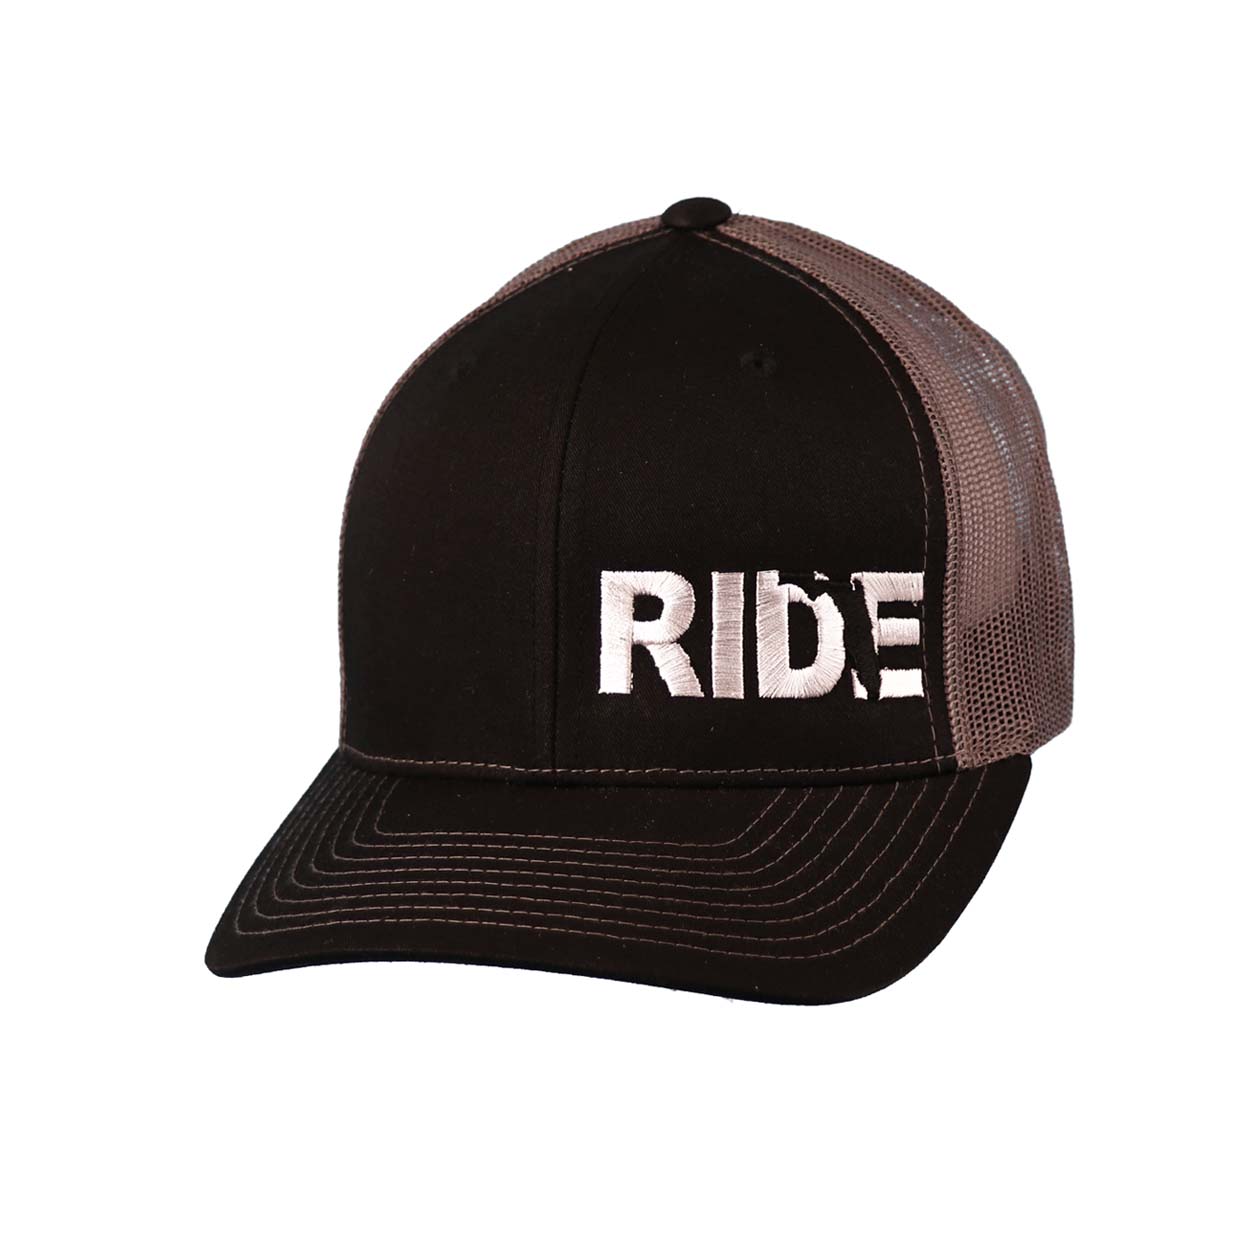 Ride Florida Night Out Pro Embroidered Snapback Trucker Hat Black/Gray